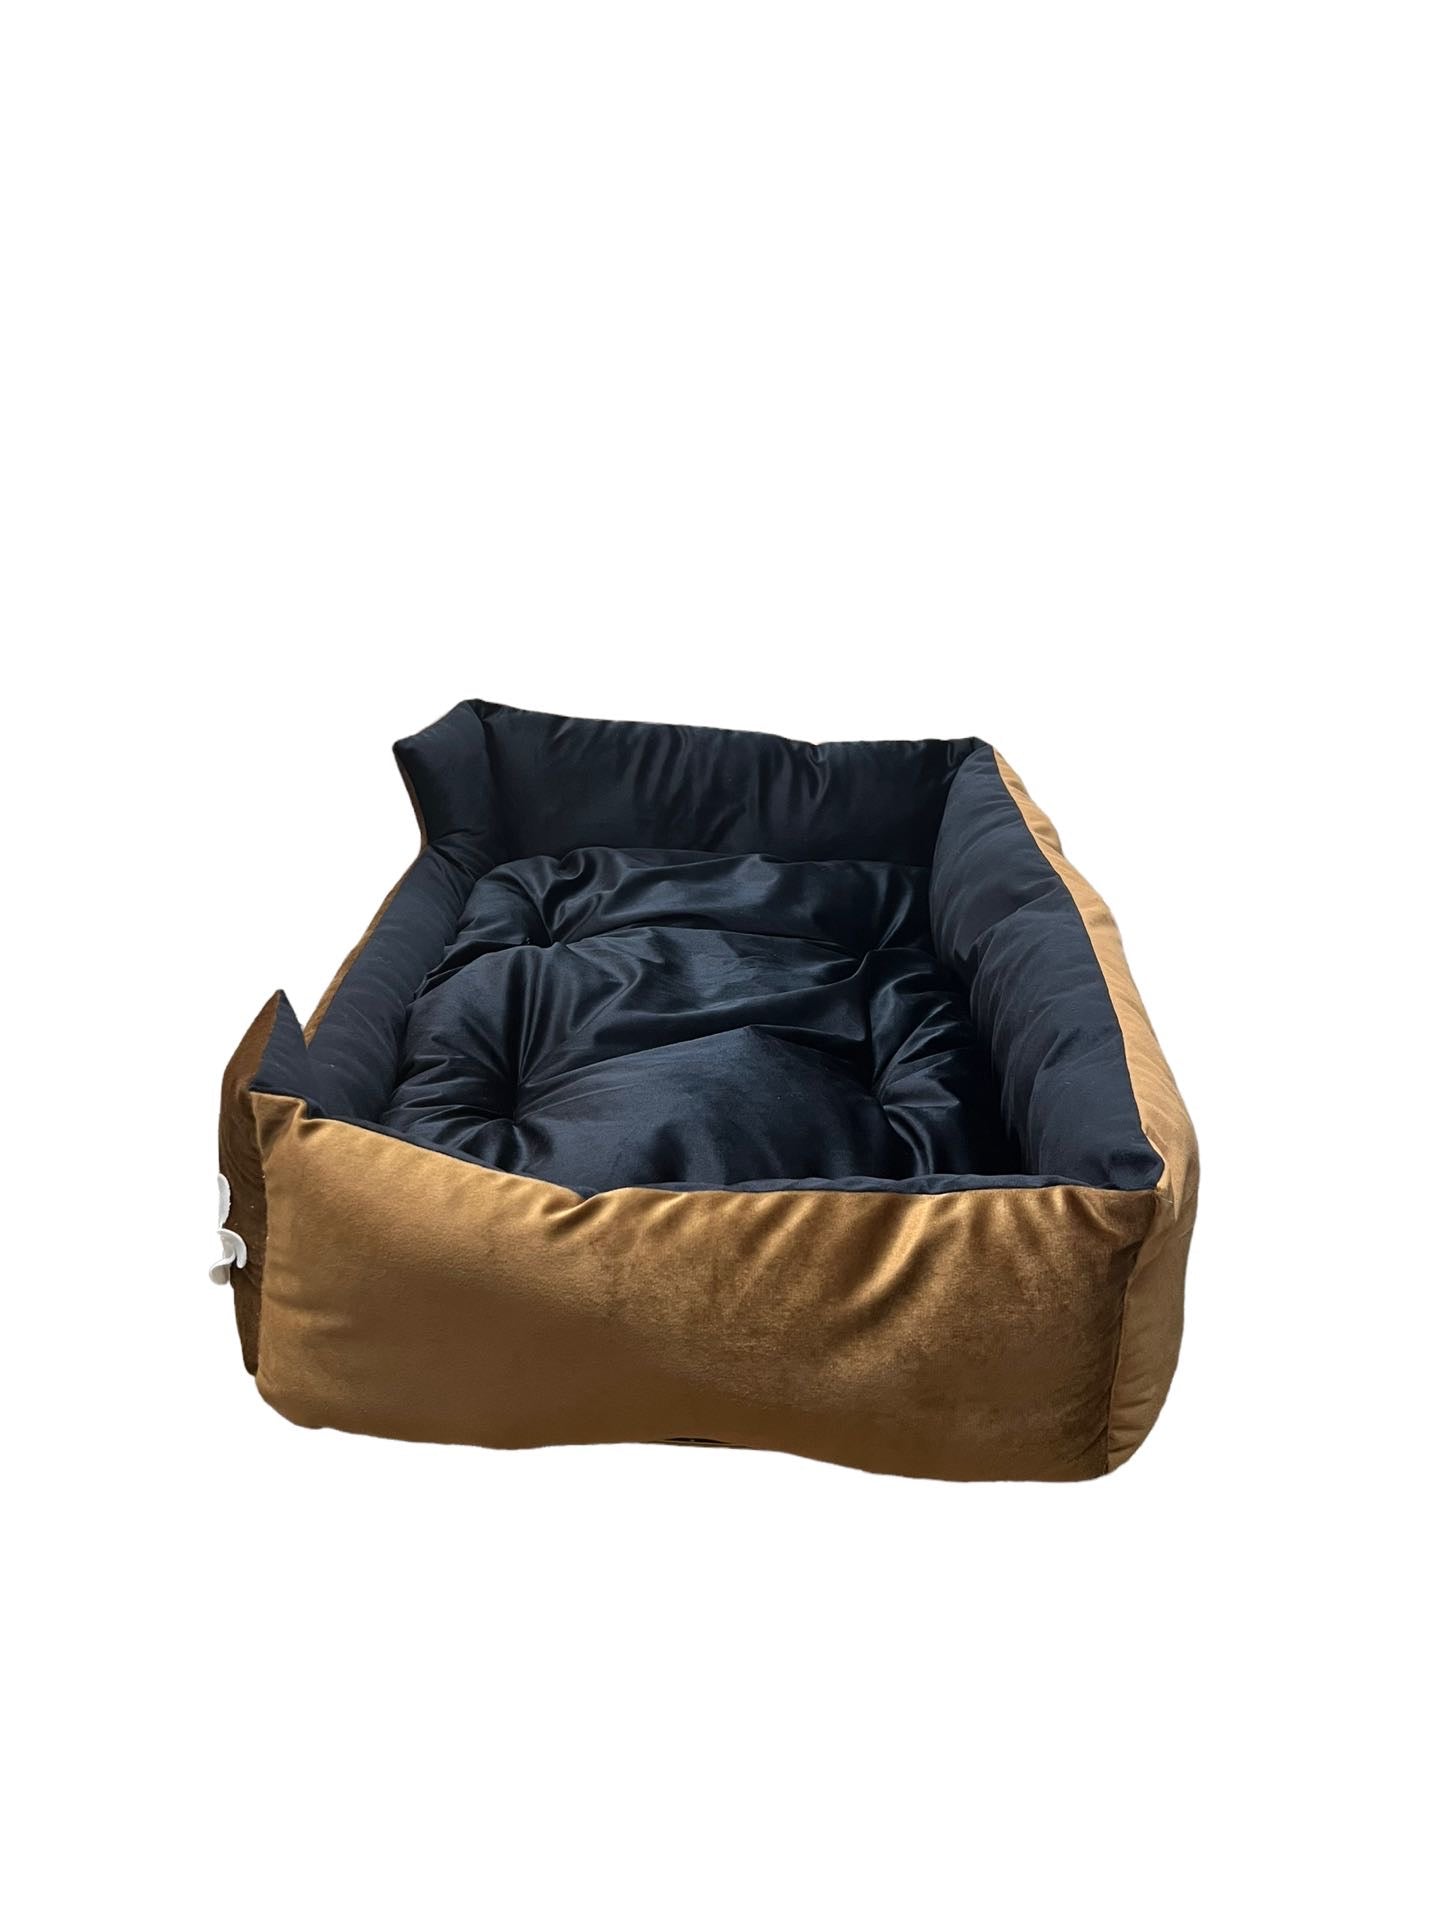 Comfy paw pet bed - XL - For cats & Small breed dogs | Brown and Black